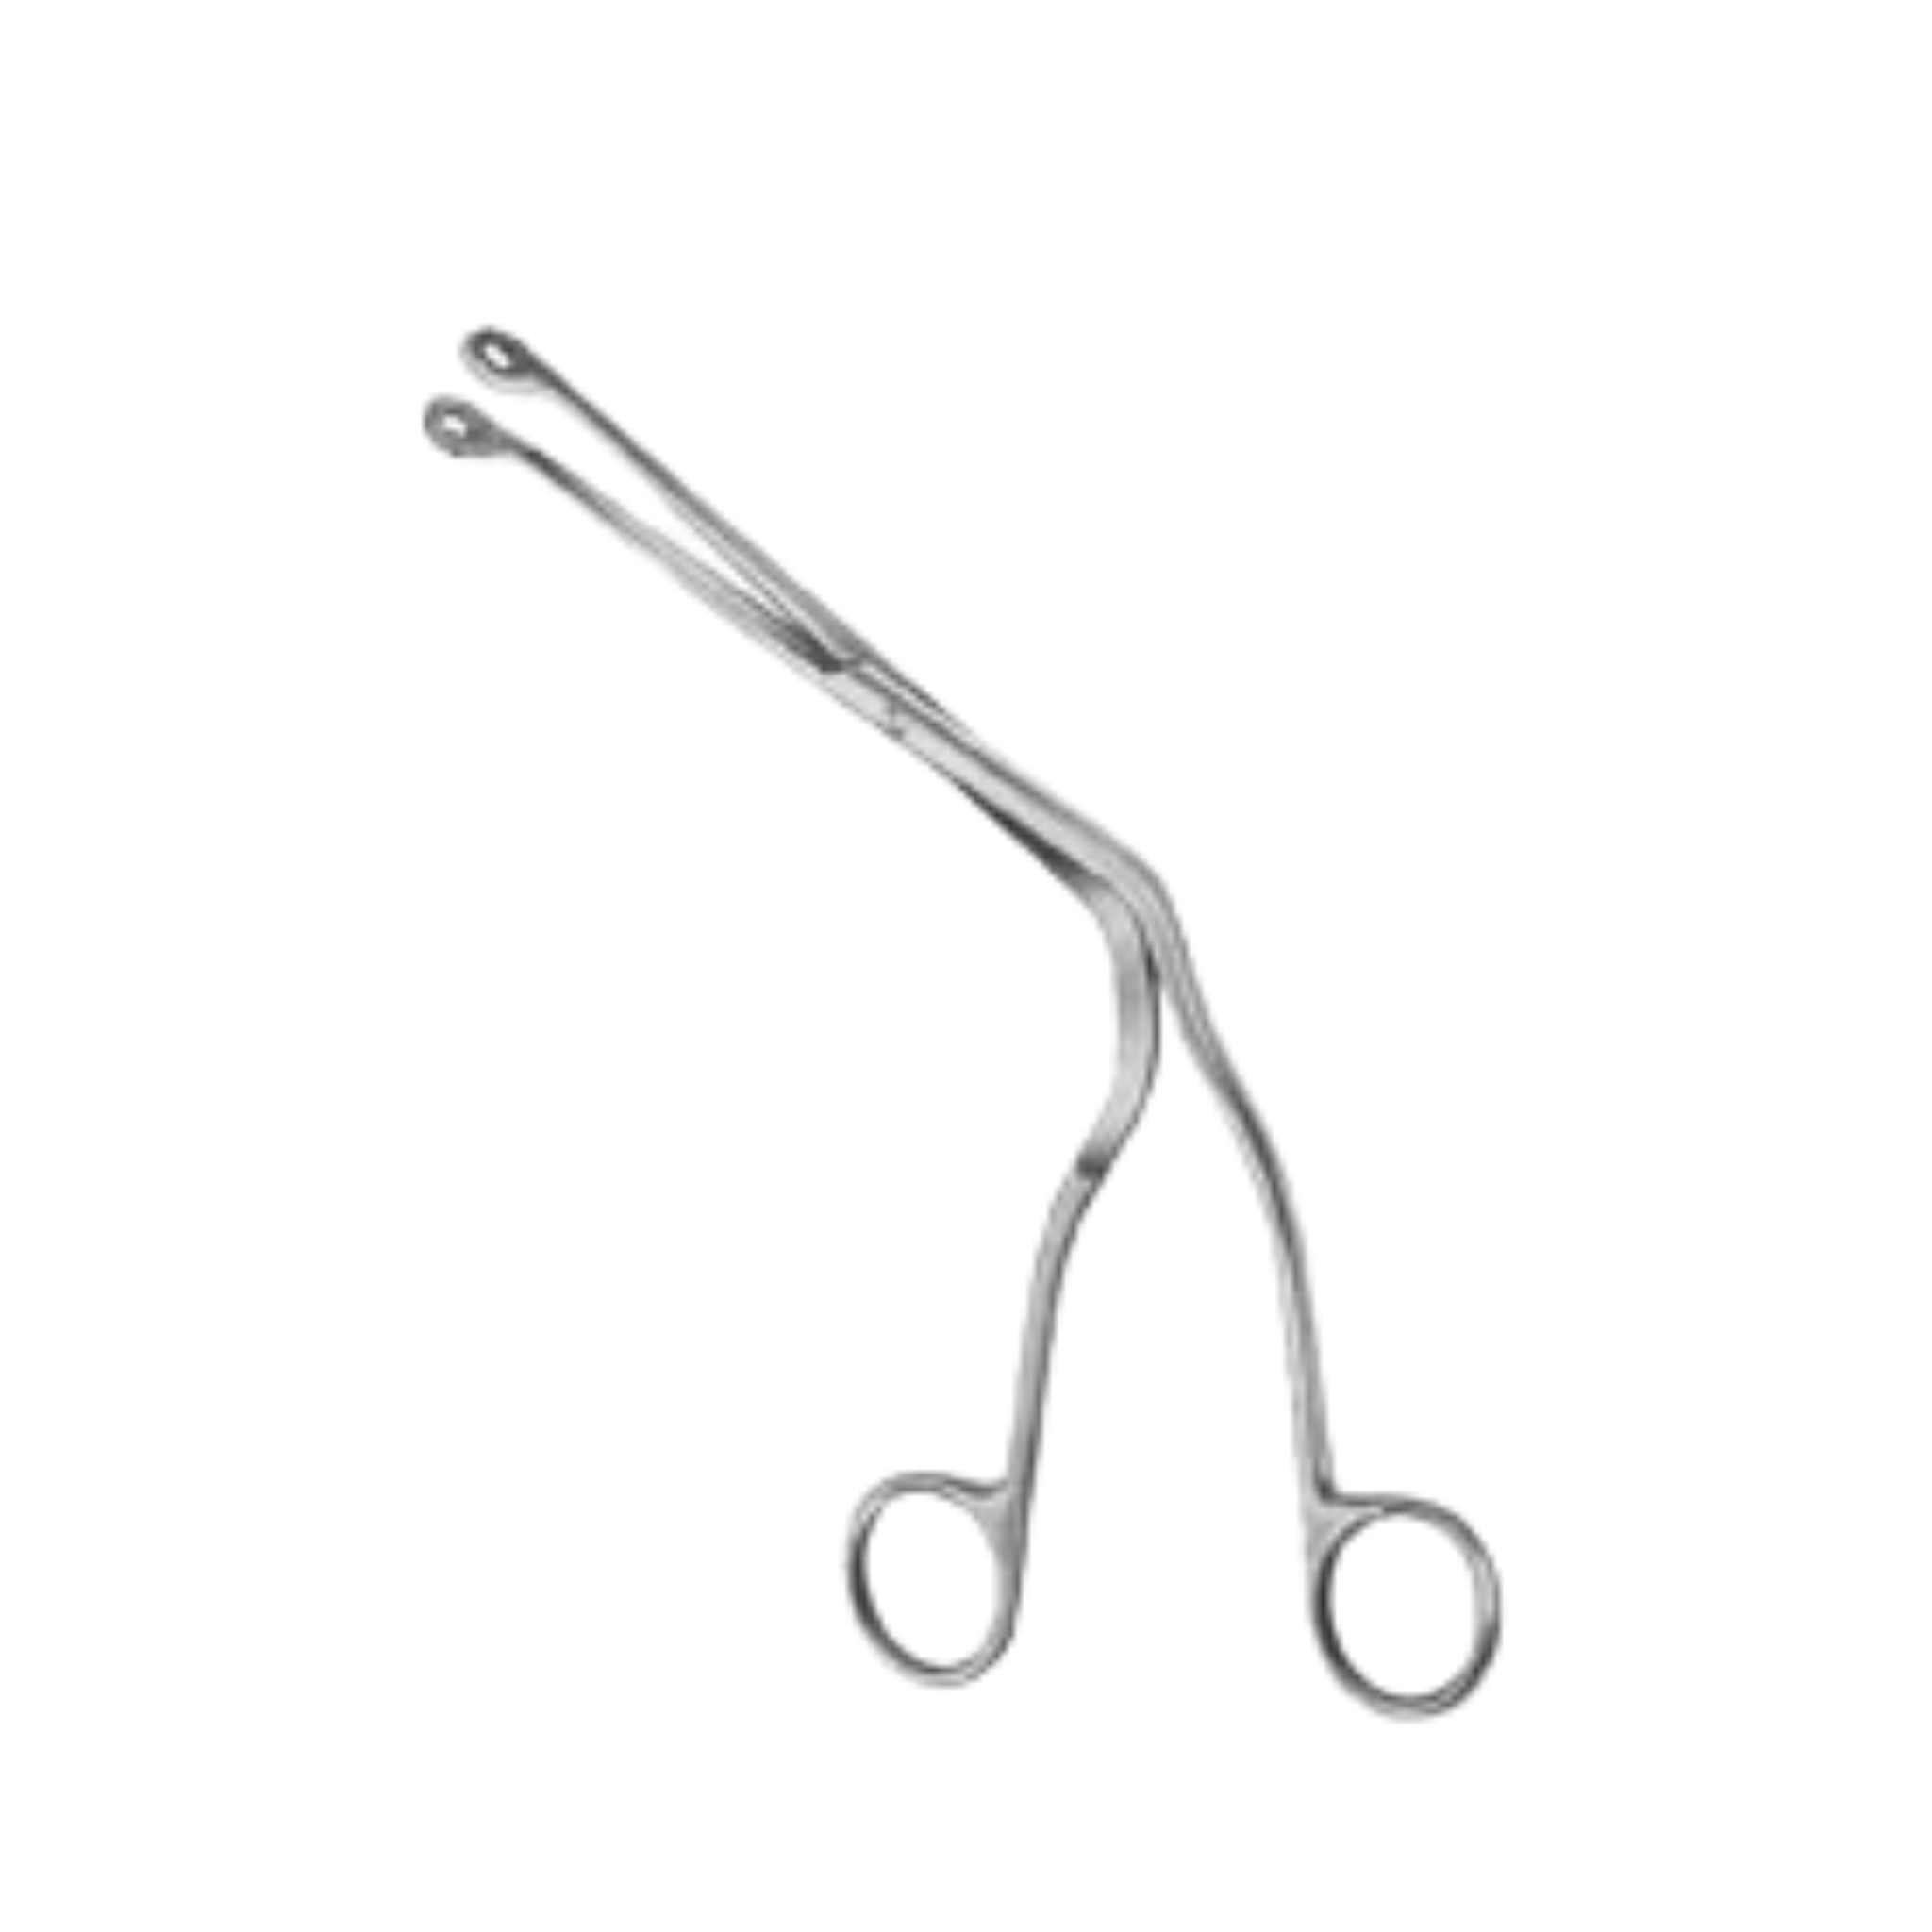 Magill Cathether Introducing Forceps- 16 cm